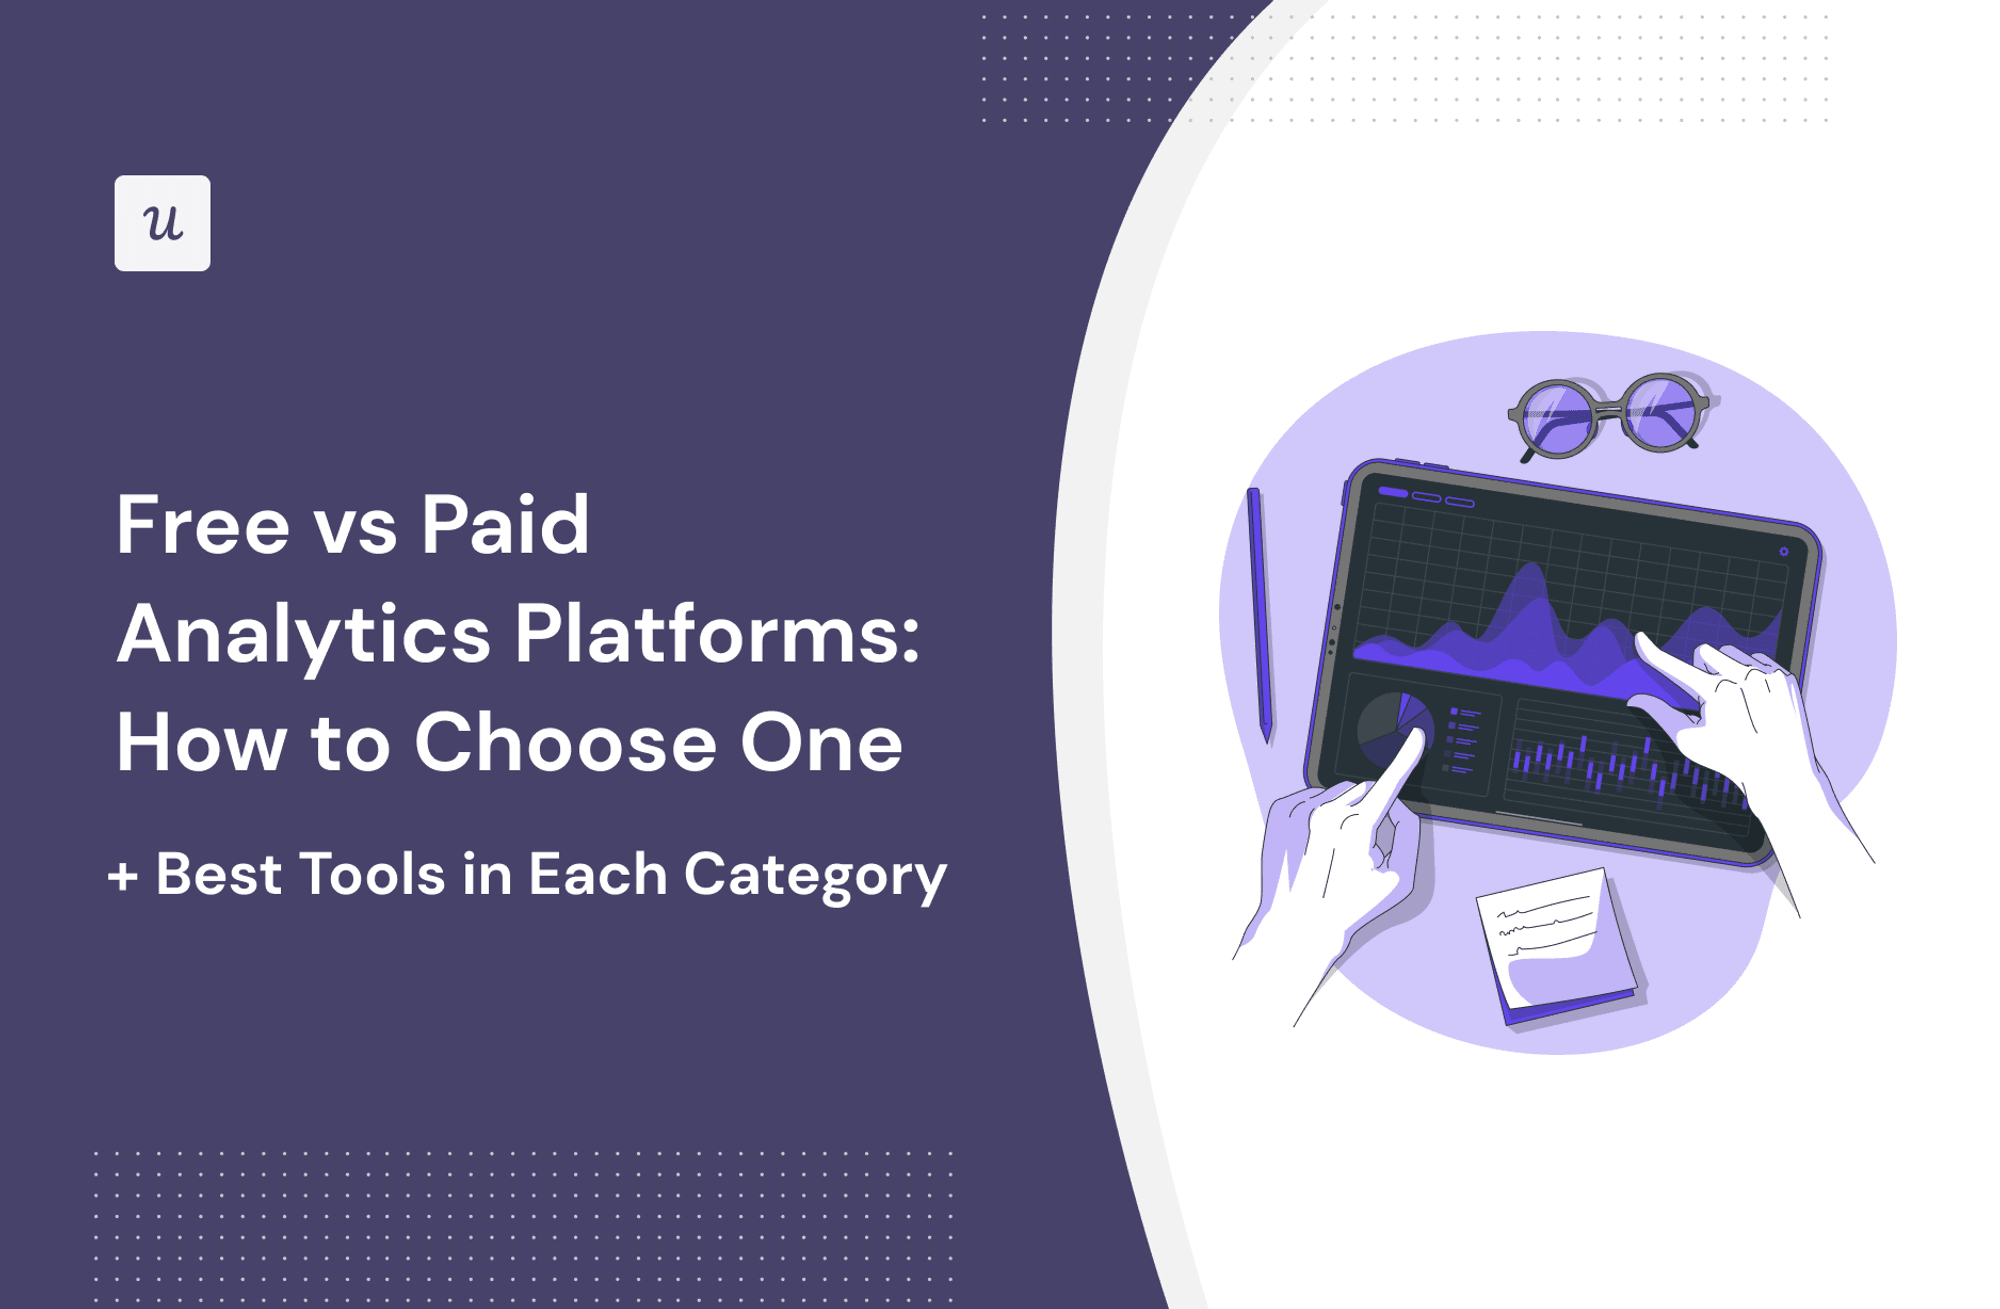 Free vs Paid Analytics Platforms: How to Choose One (+ Best Tools in Each Category) cover